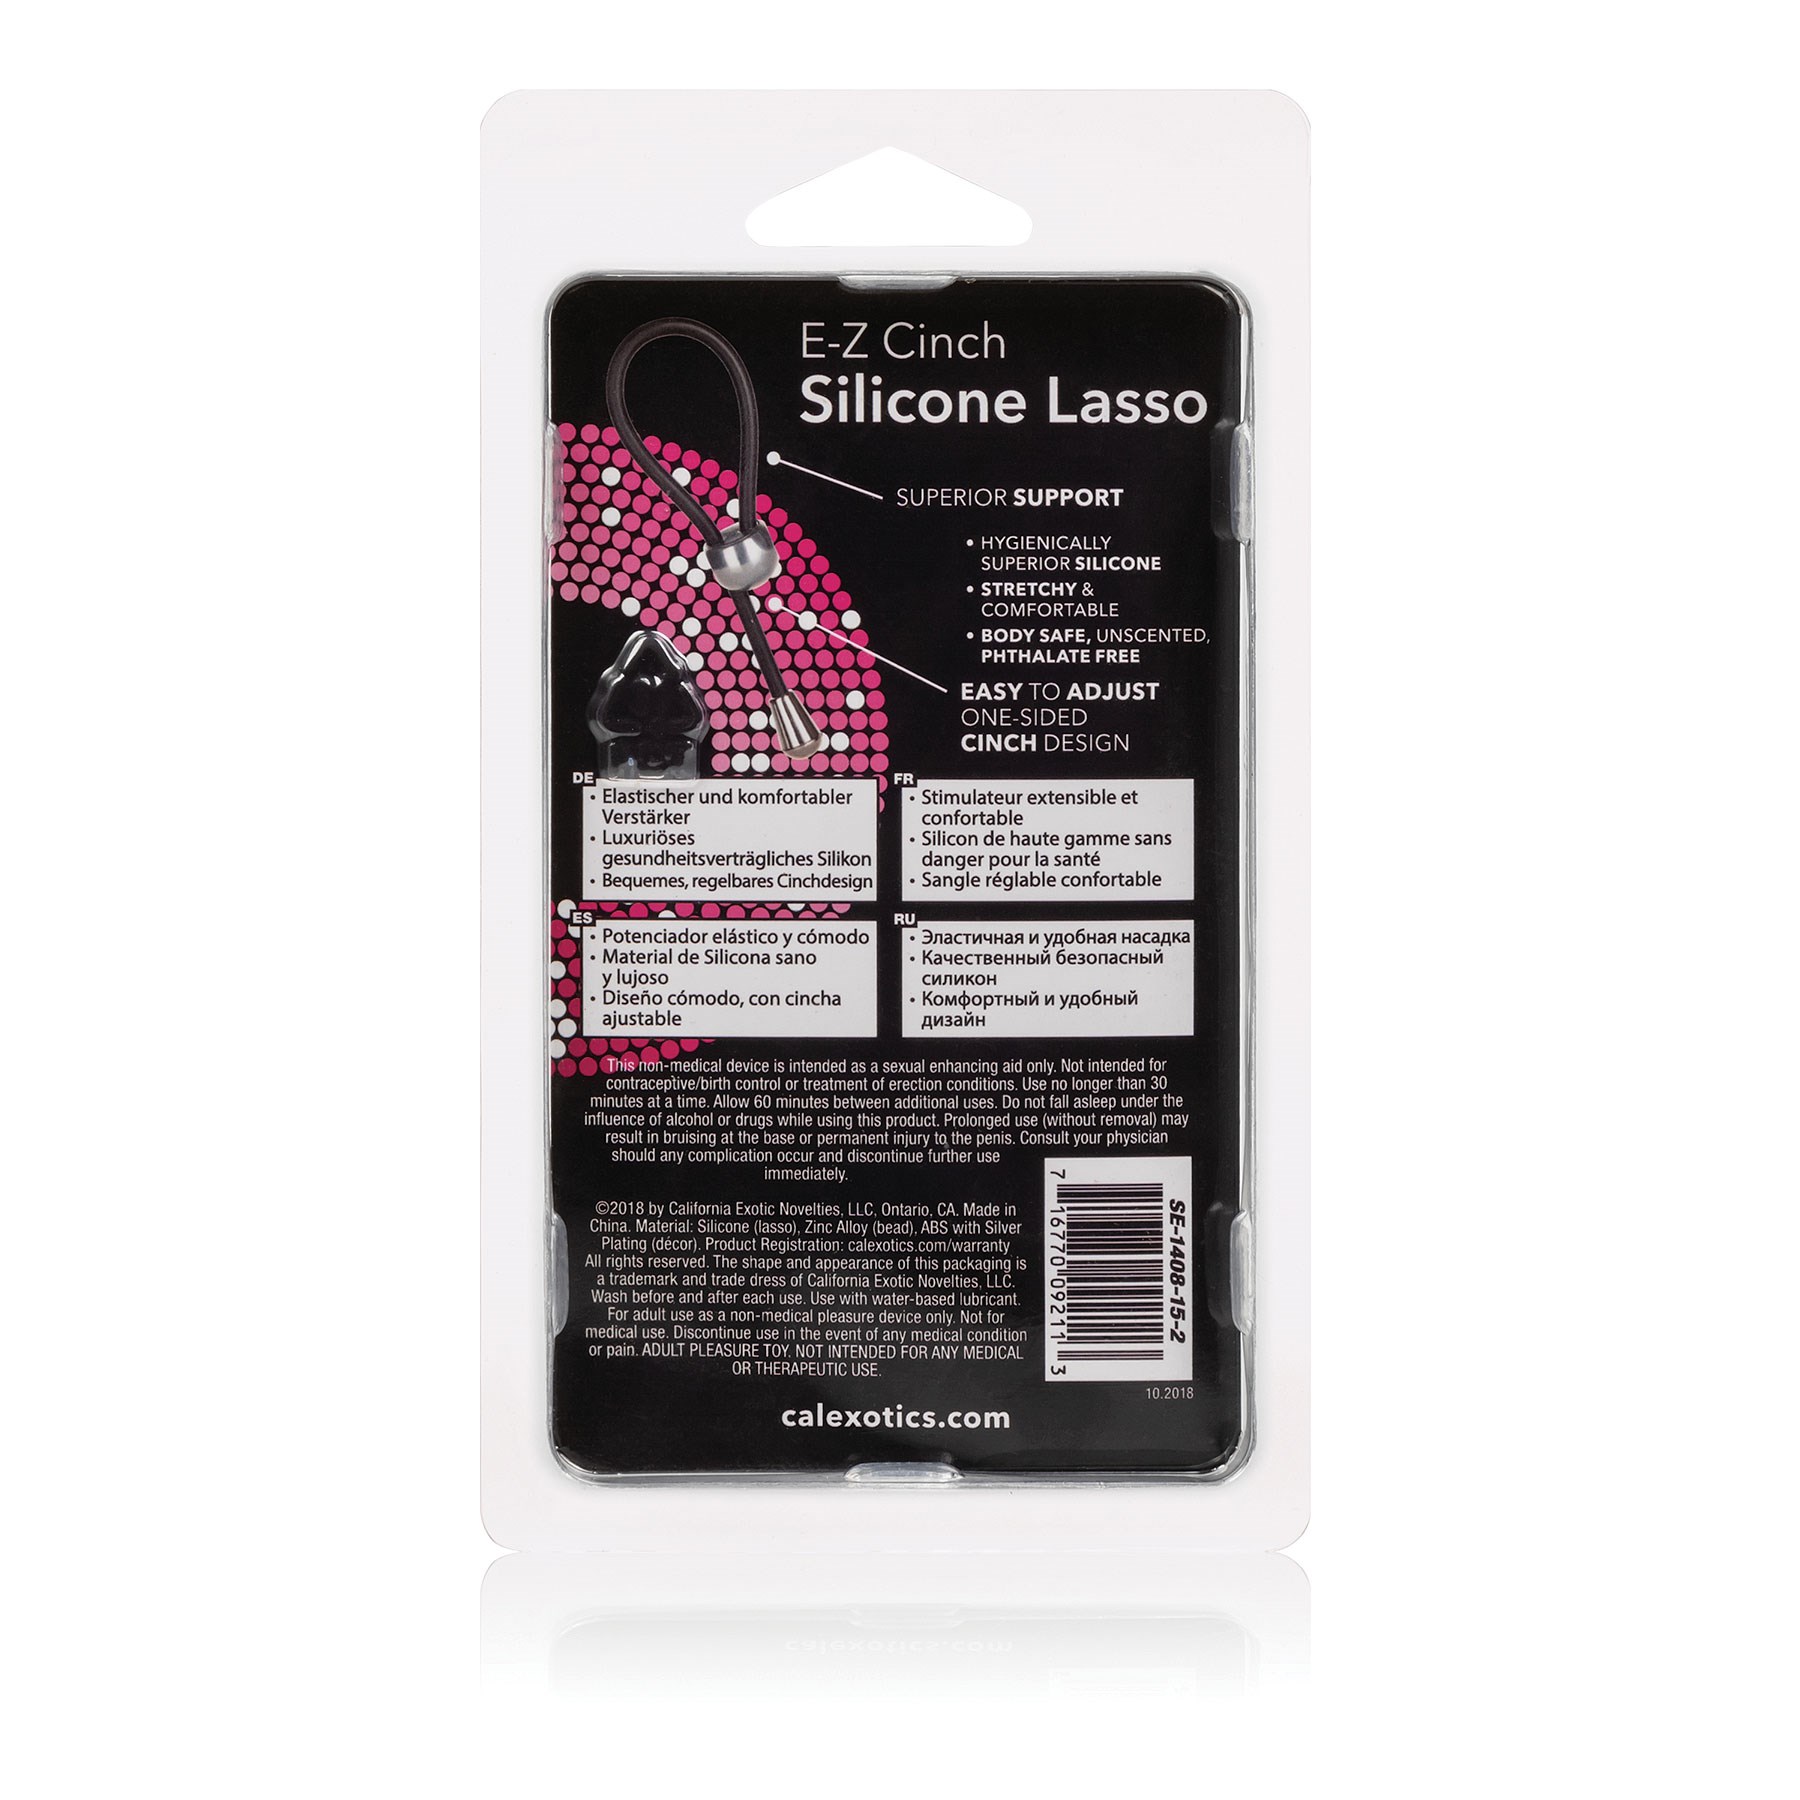 E-Z Cinch Silicone Lasso back of package